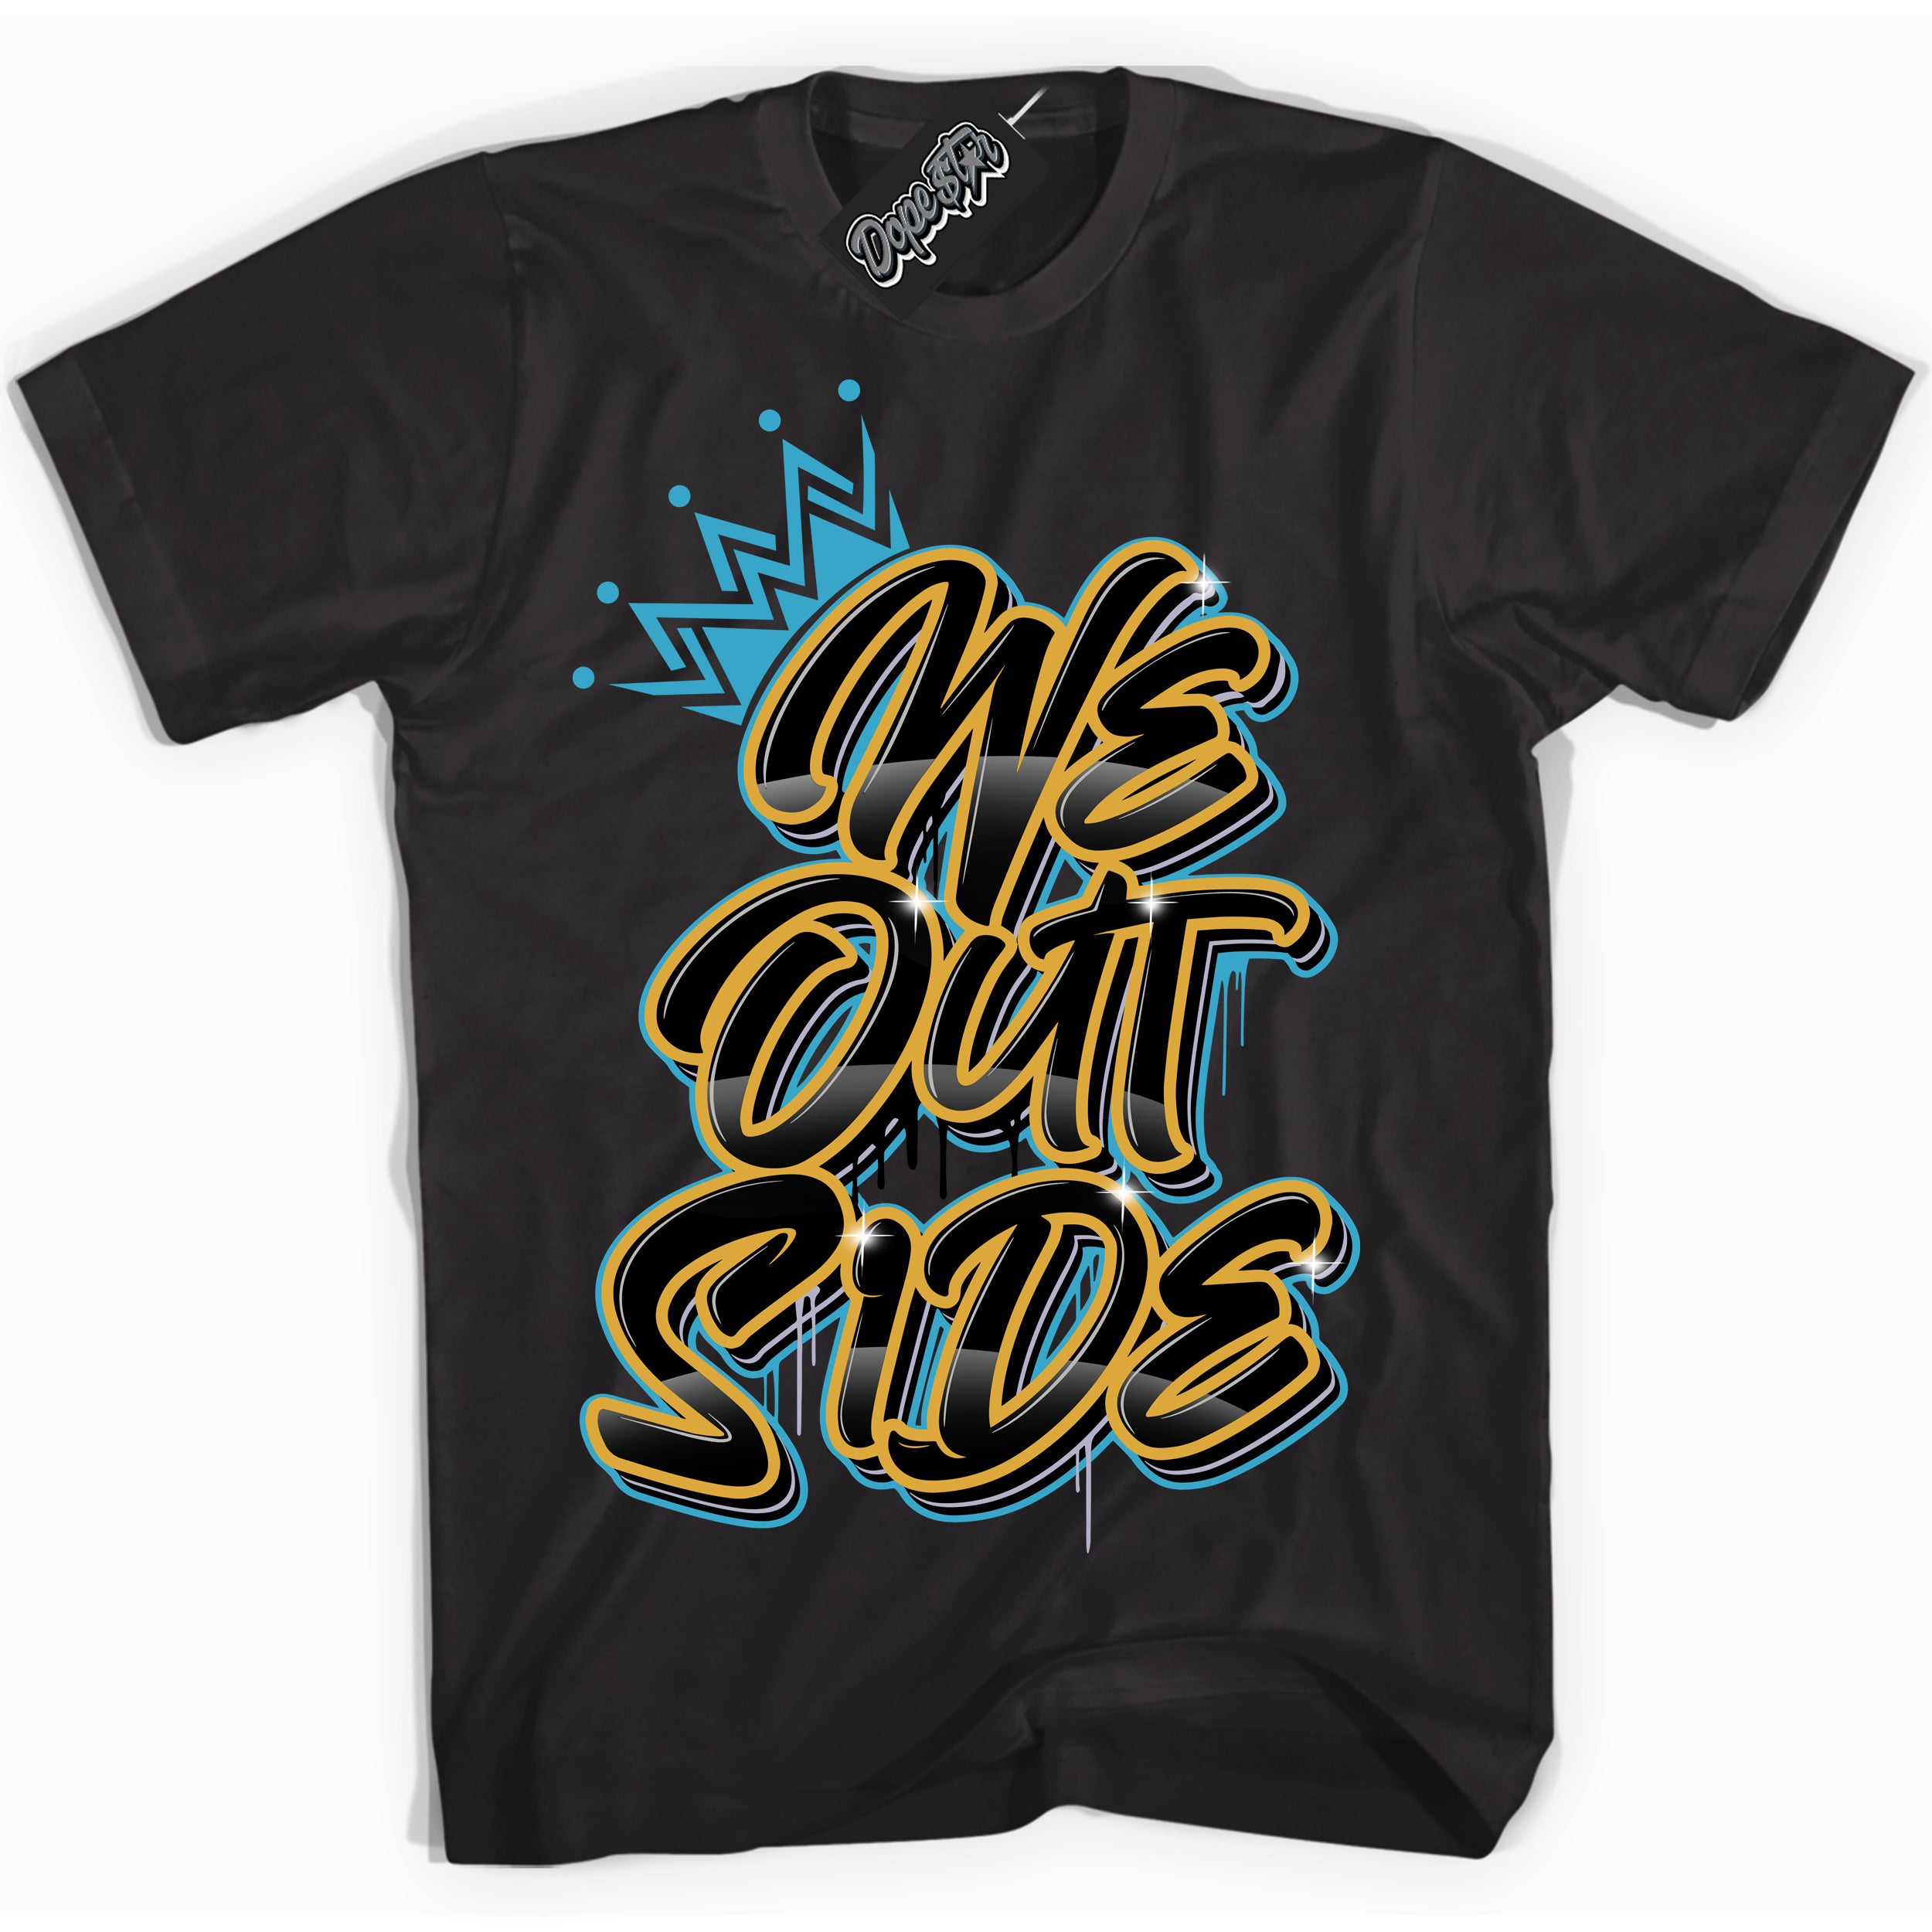 Cool Black Shirt with “ We Outside” design that perfectly matches Aqua 5s Sneakers.